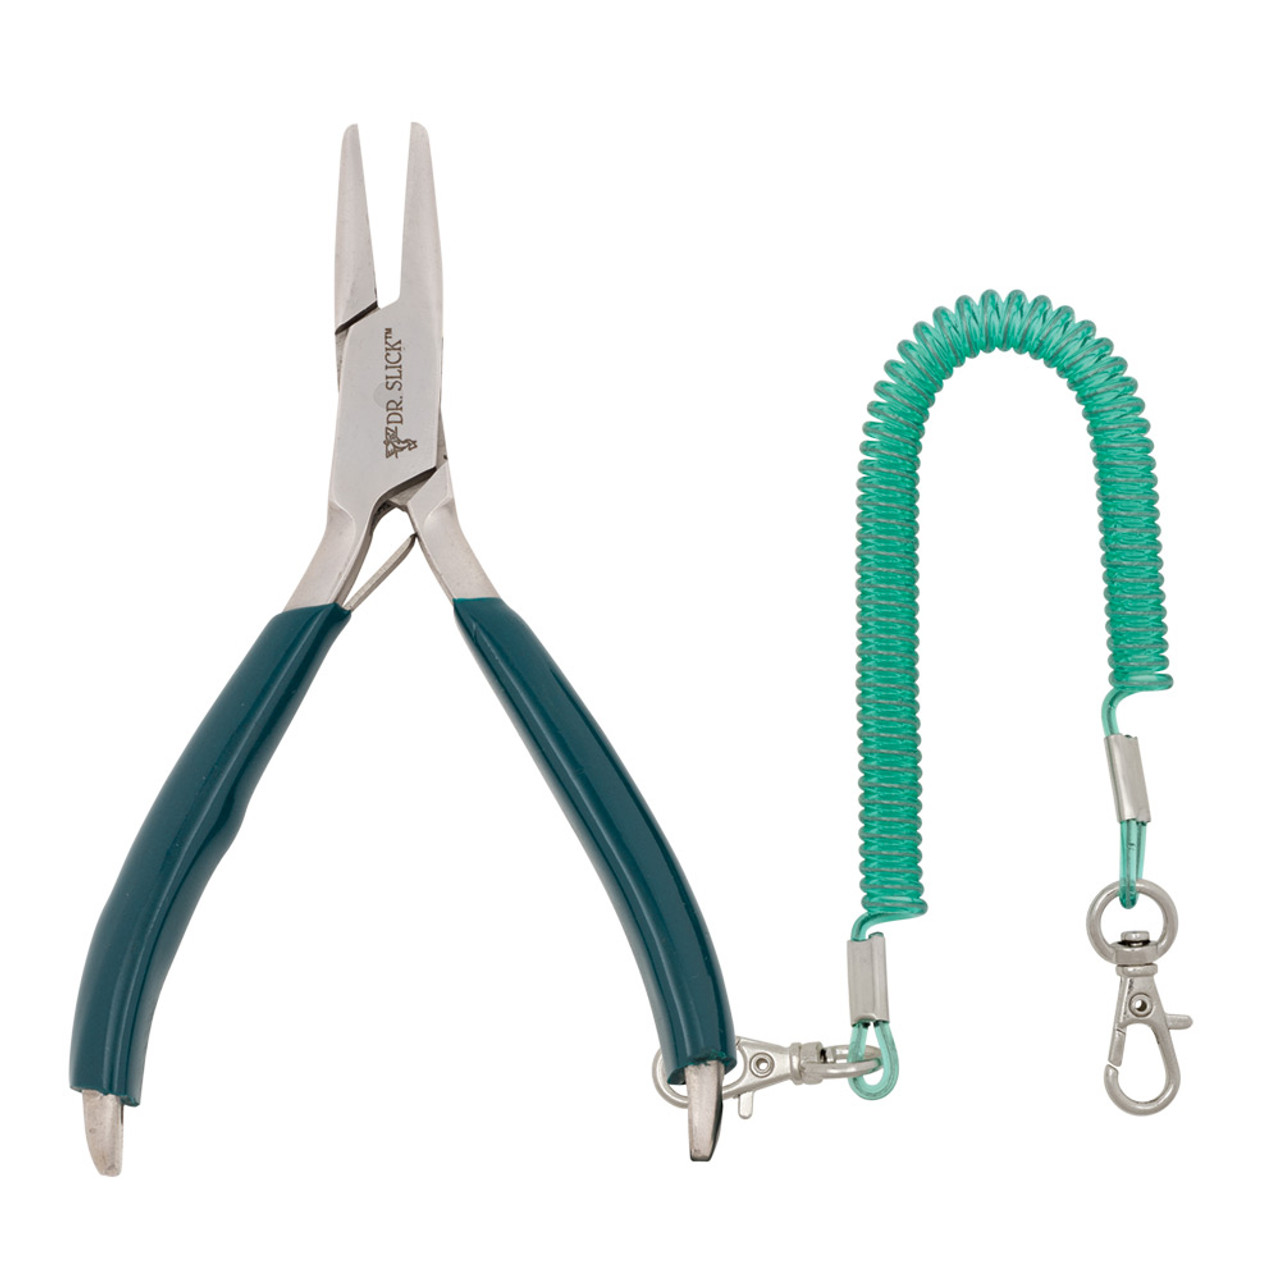 DR. SLICK BARB PLIERS 4 - FRED'S CUSTOM TACKLE